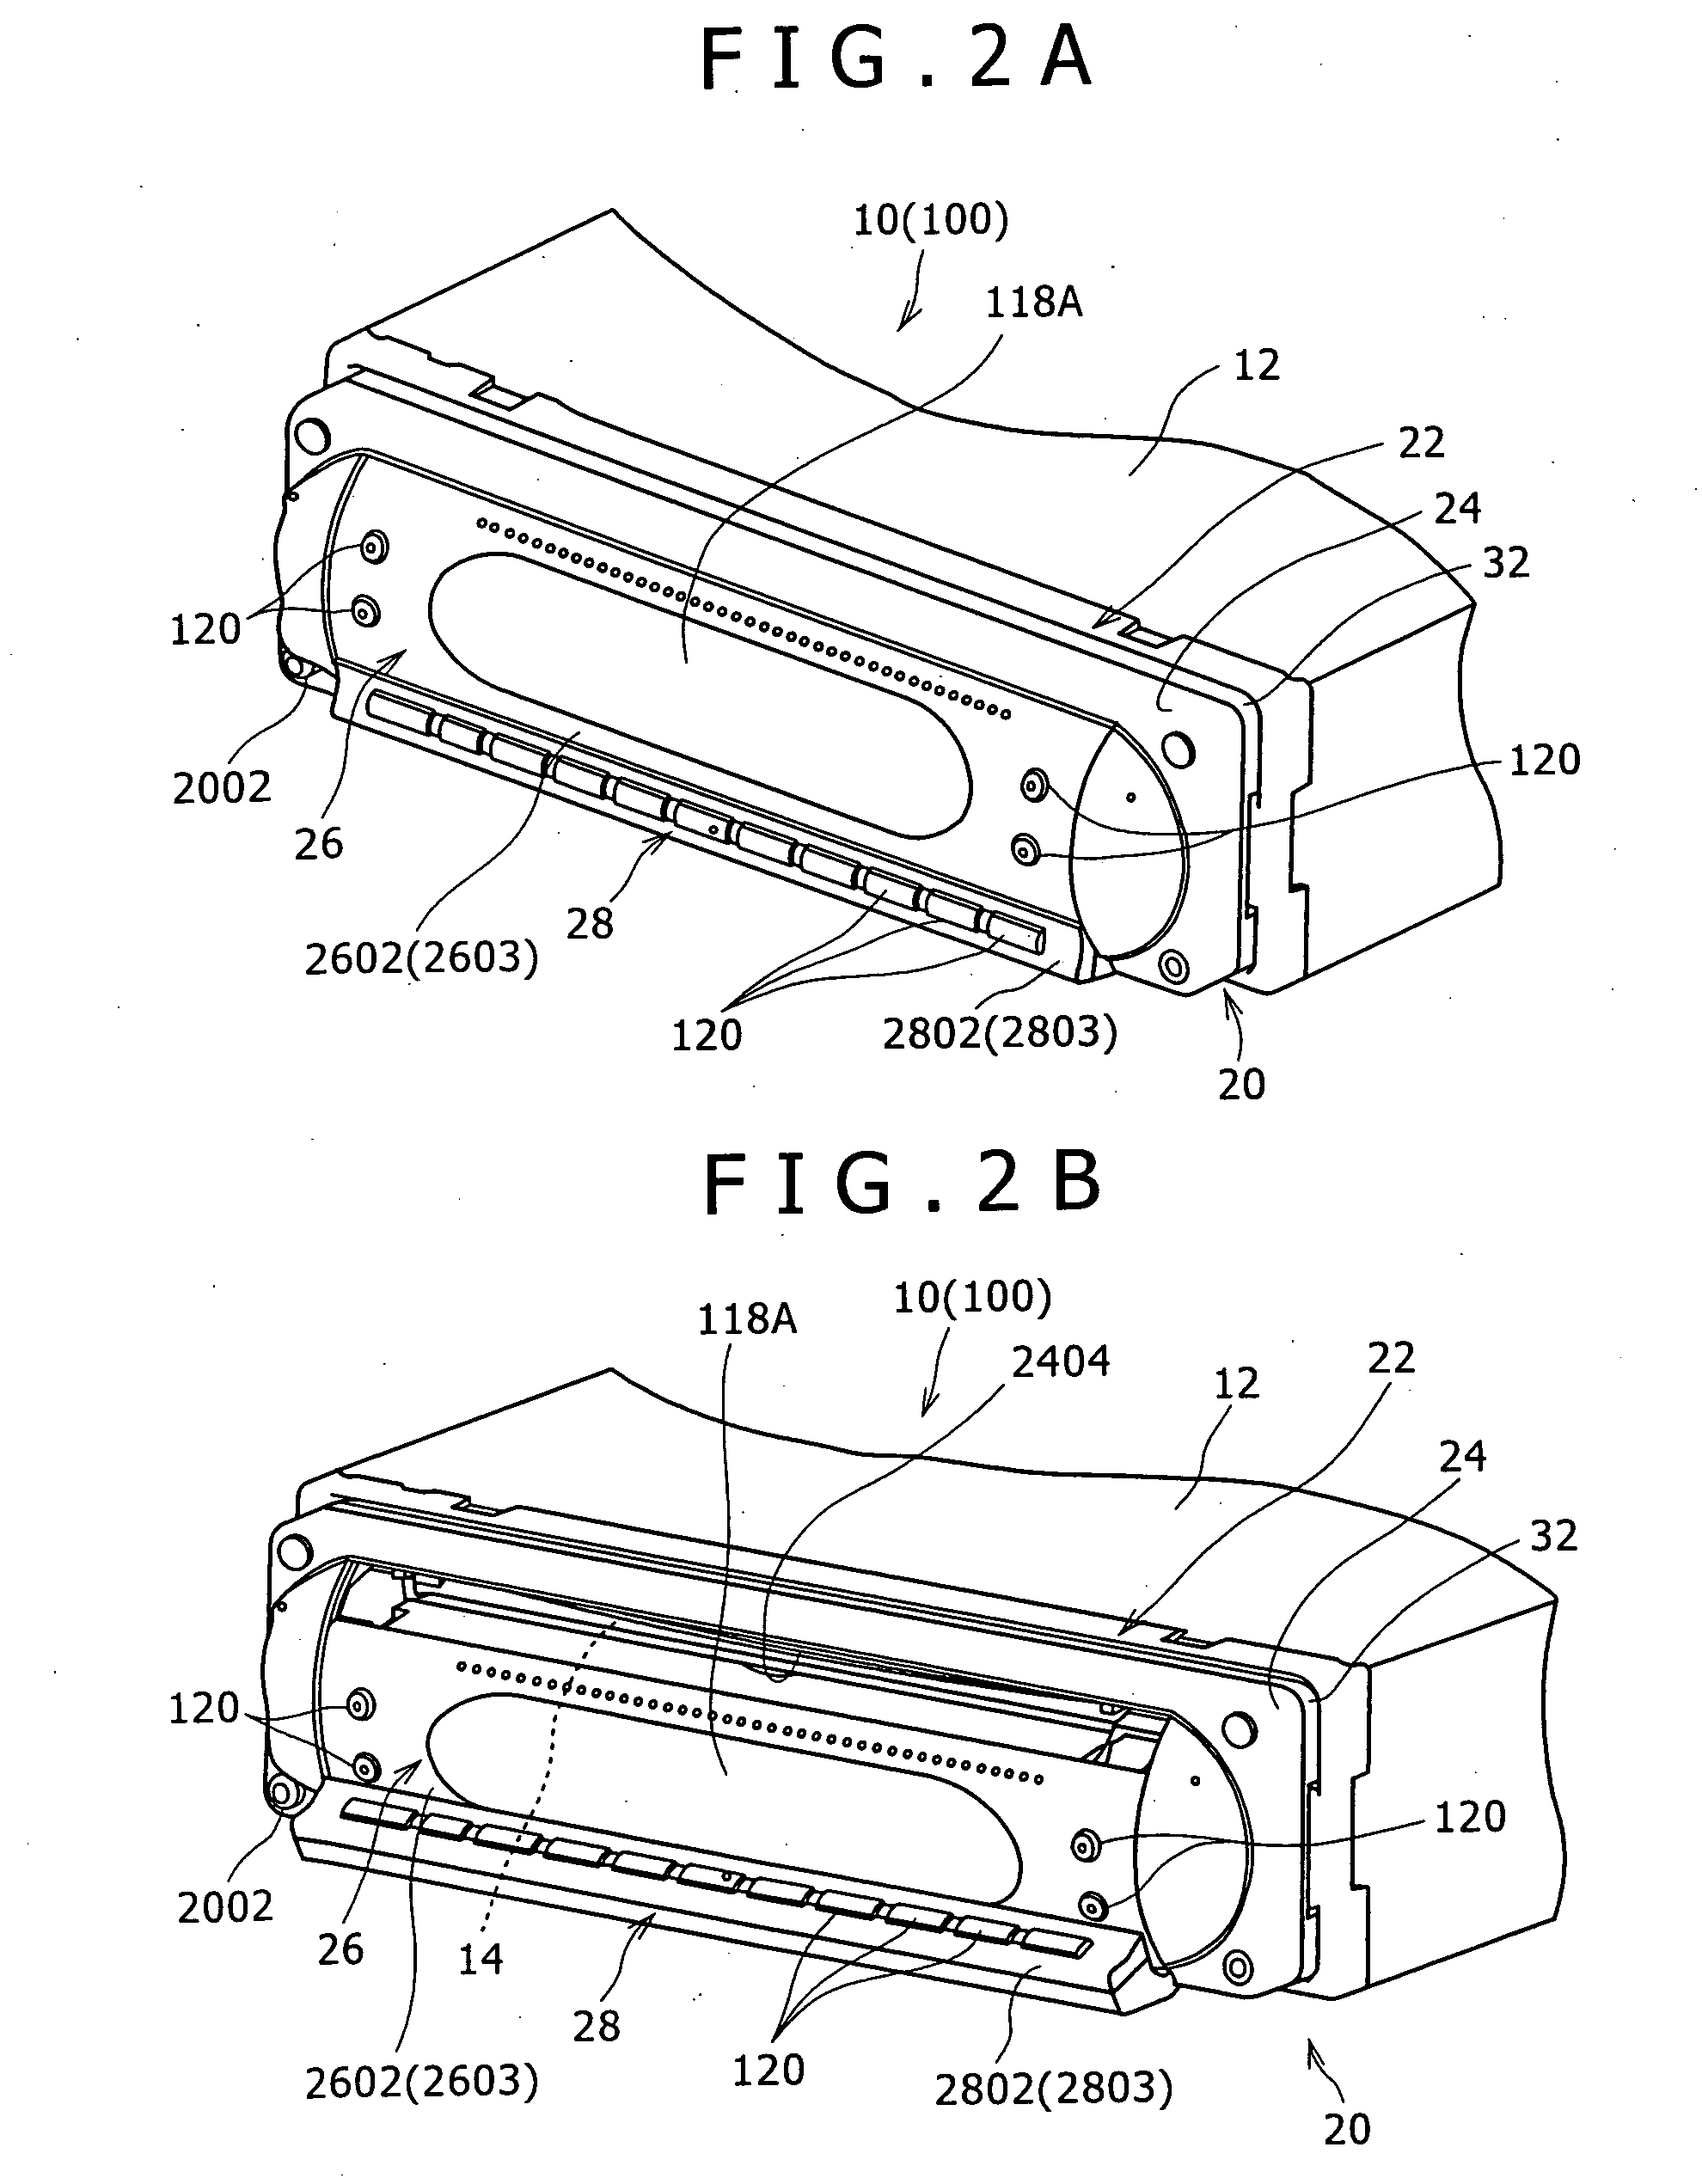 Housing for on-vehicle electronic apparatus